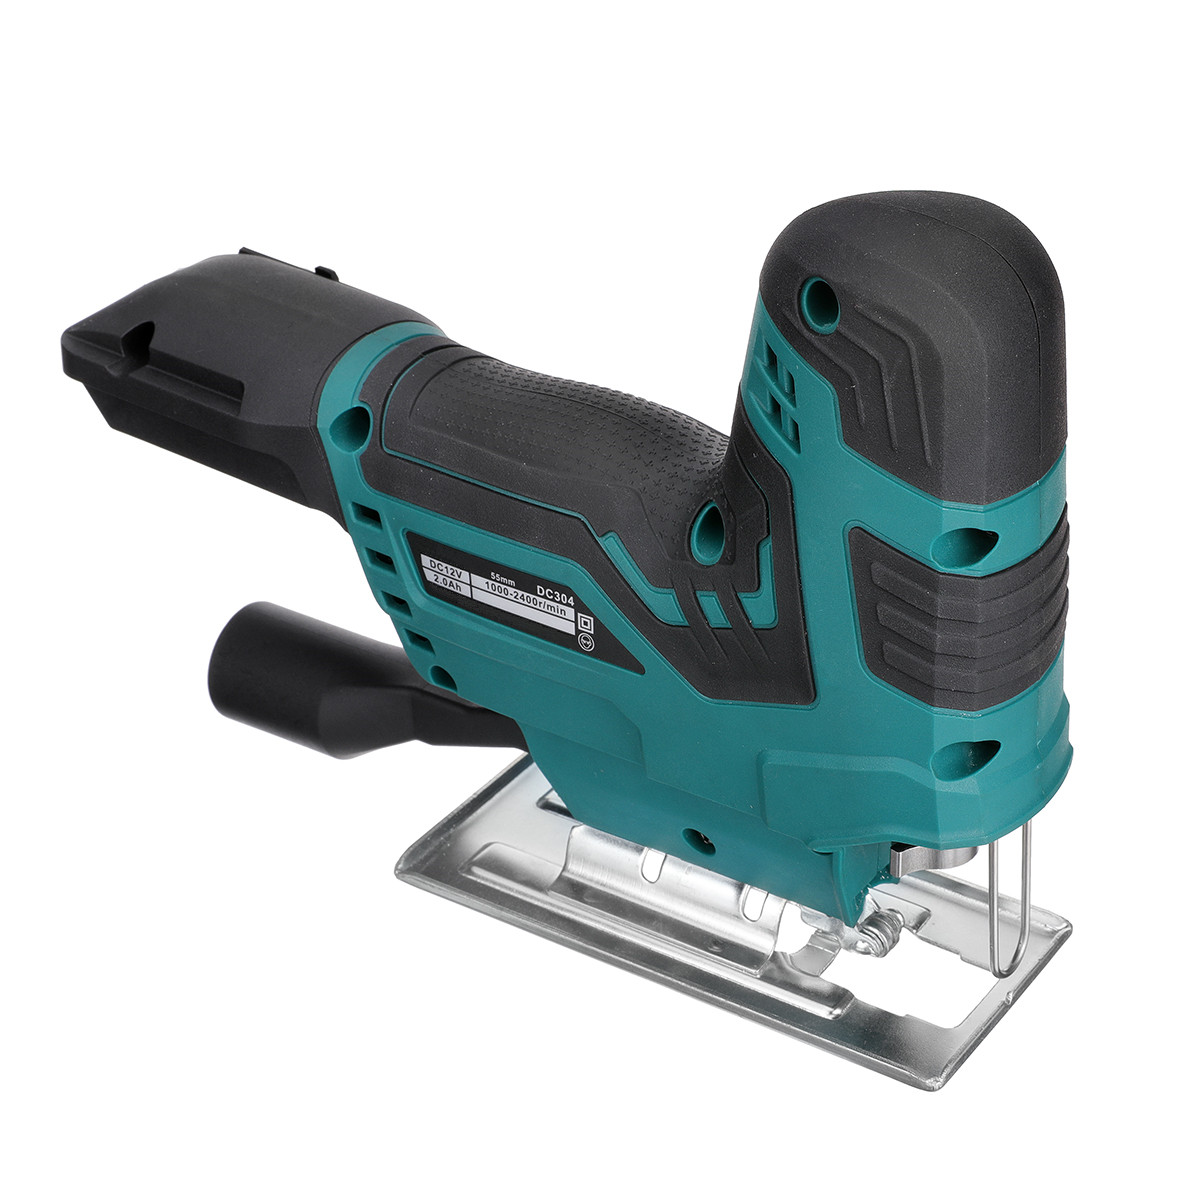 Drillpro-6-Speeds-55mm-2400RPM-Cordless-Jigsaw-Electric-Jig-Saw-Multi-function-Woodworking-Power-Too-1937968-11